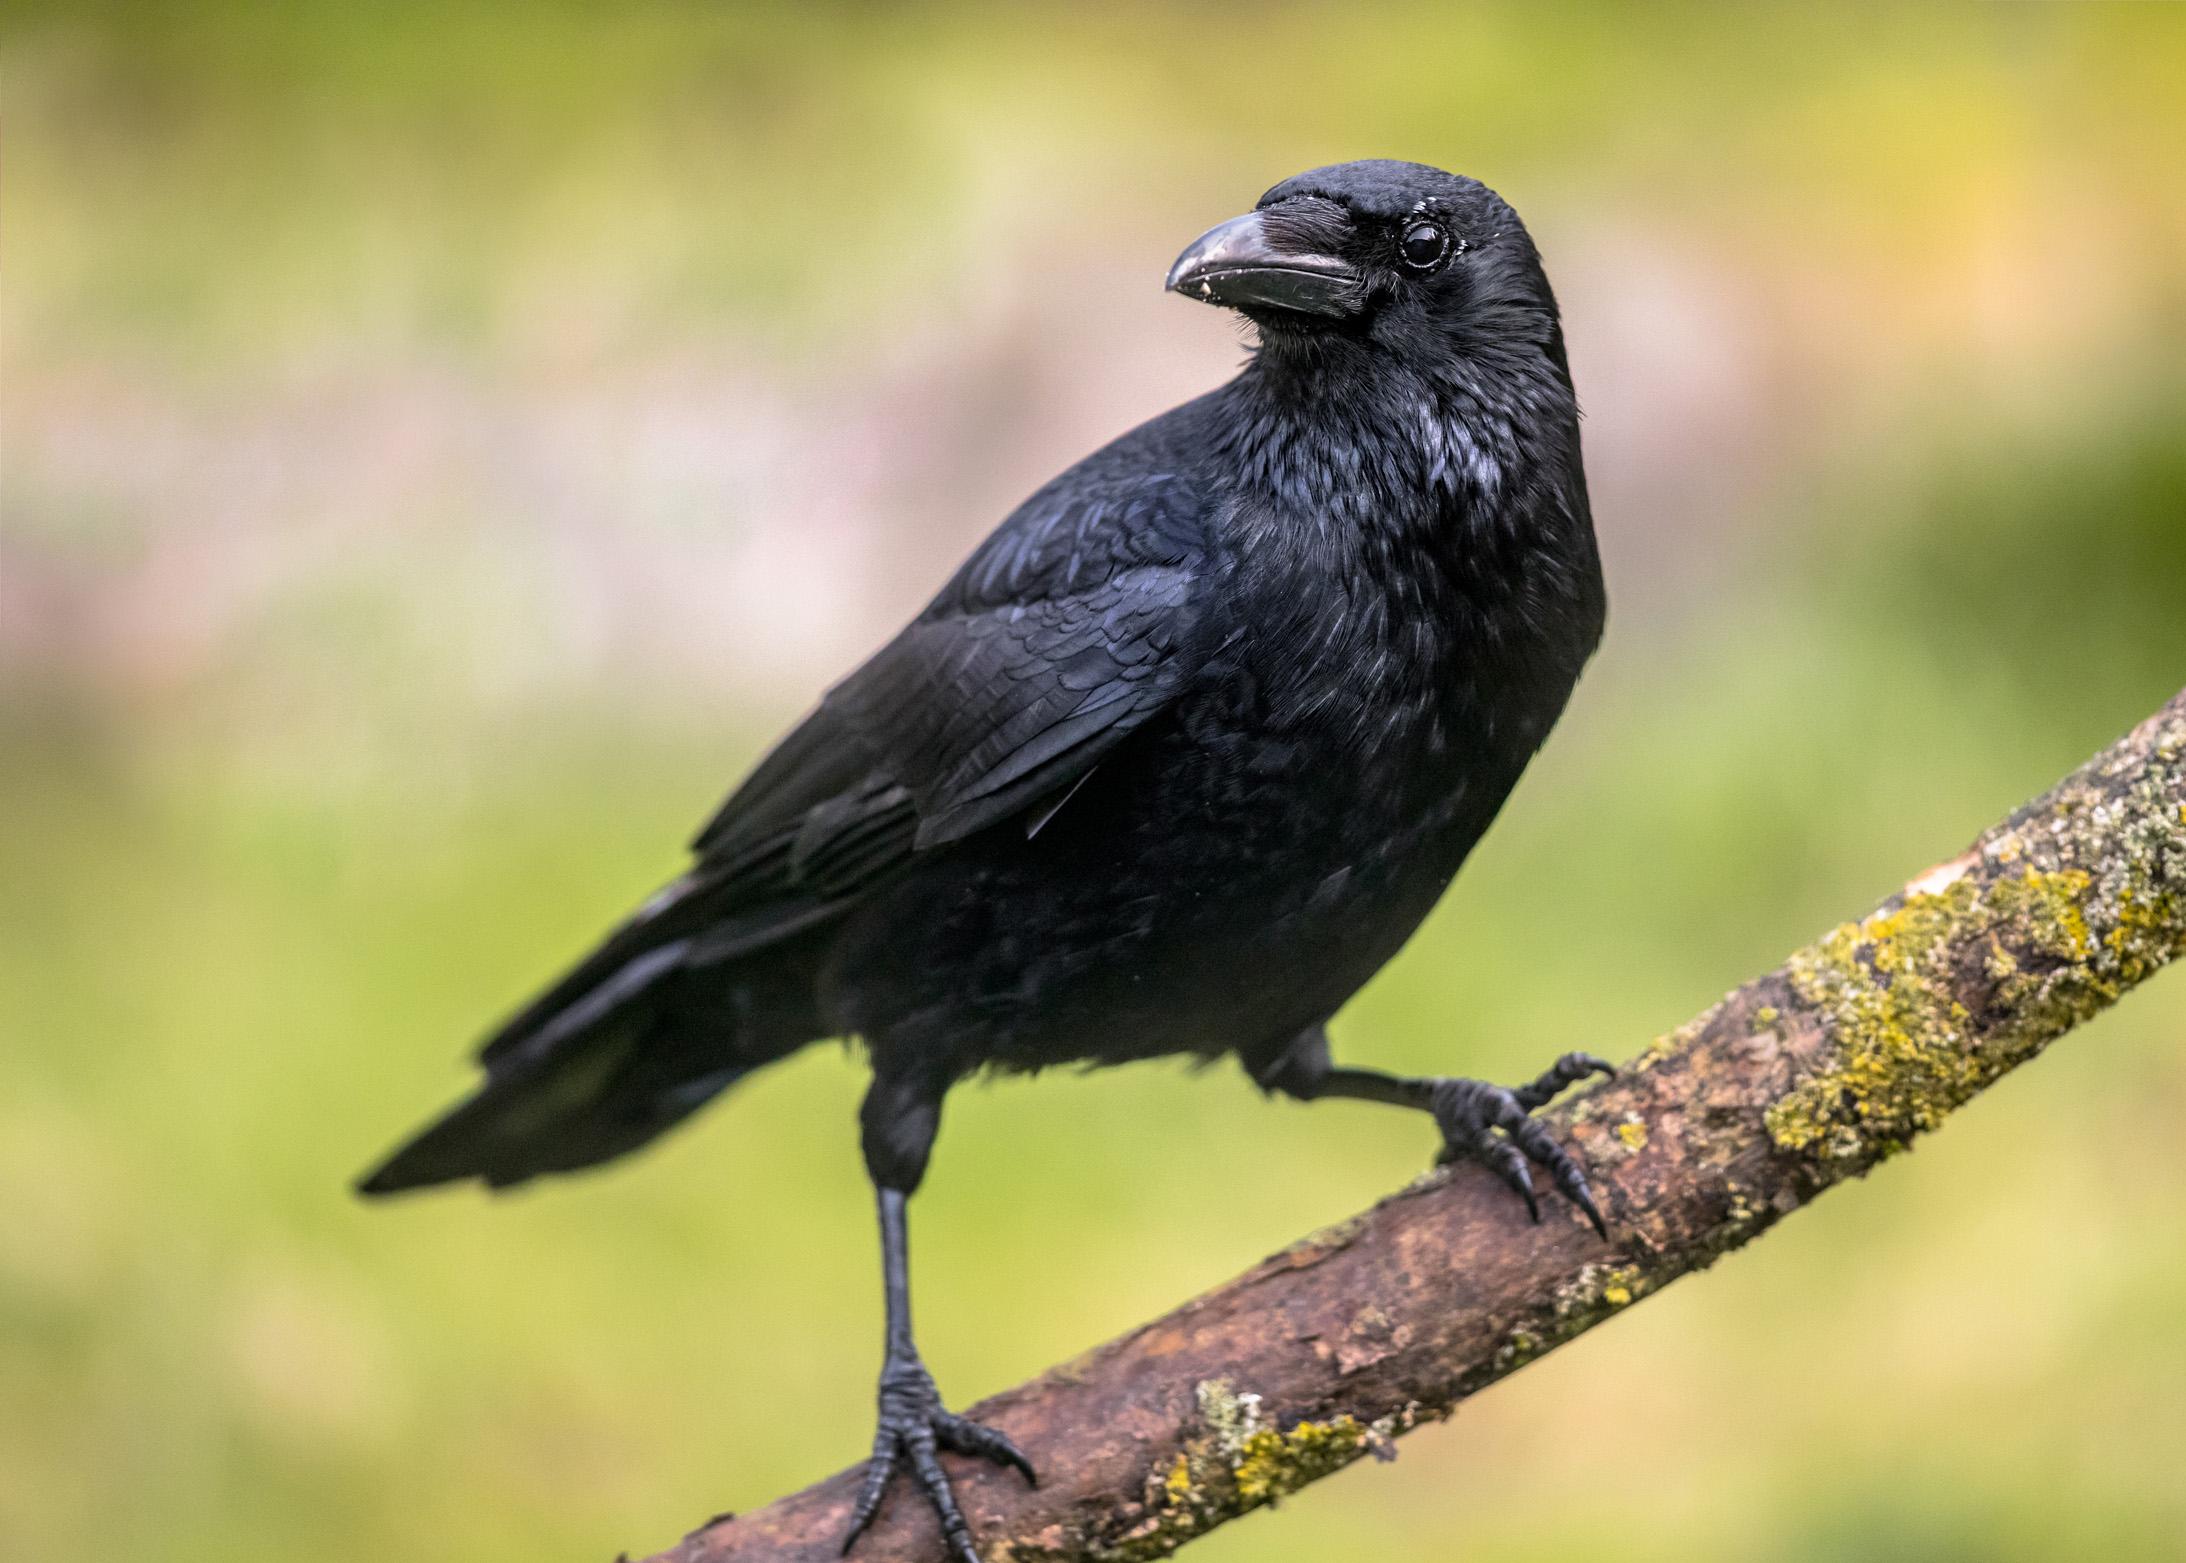 A lone Carrion Crow perched on a mossy branch.